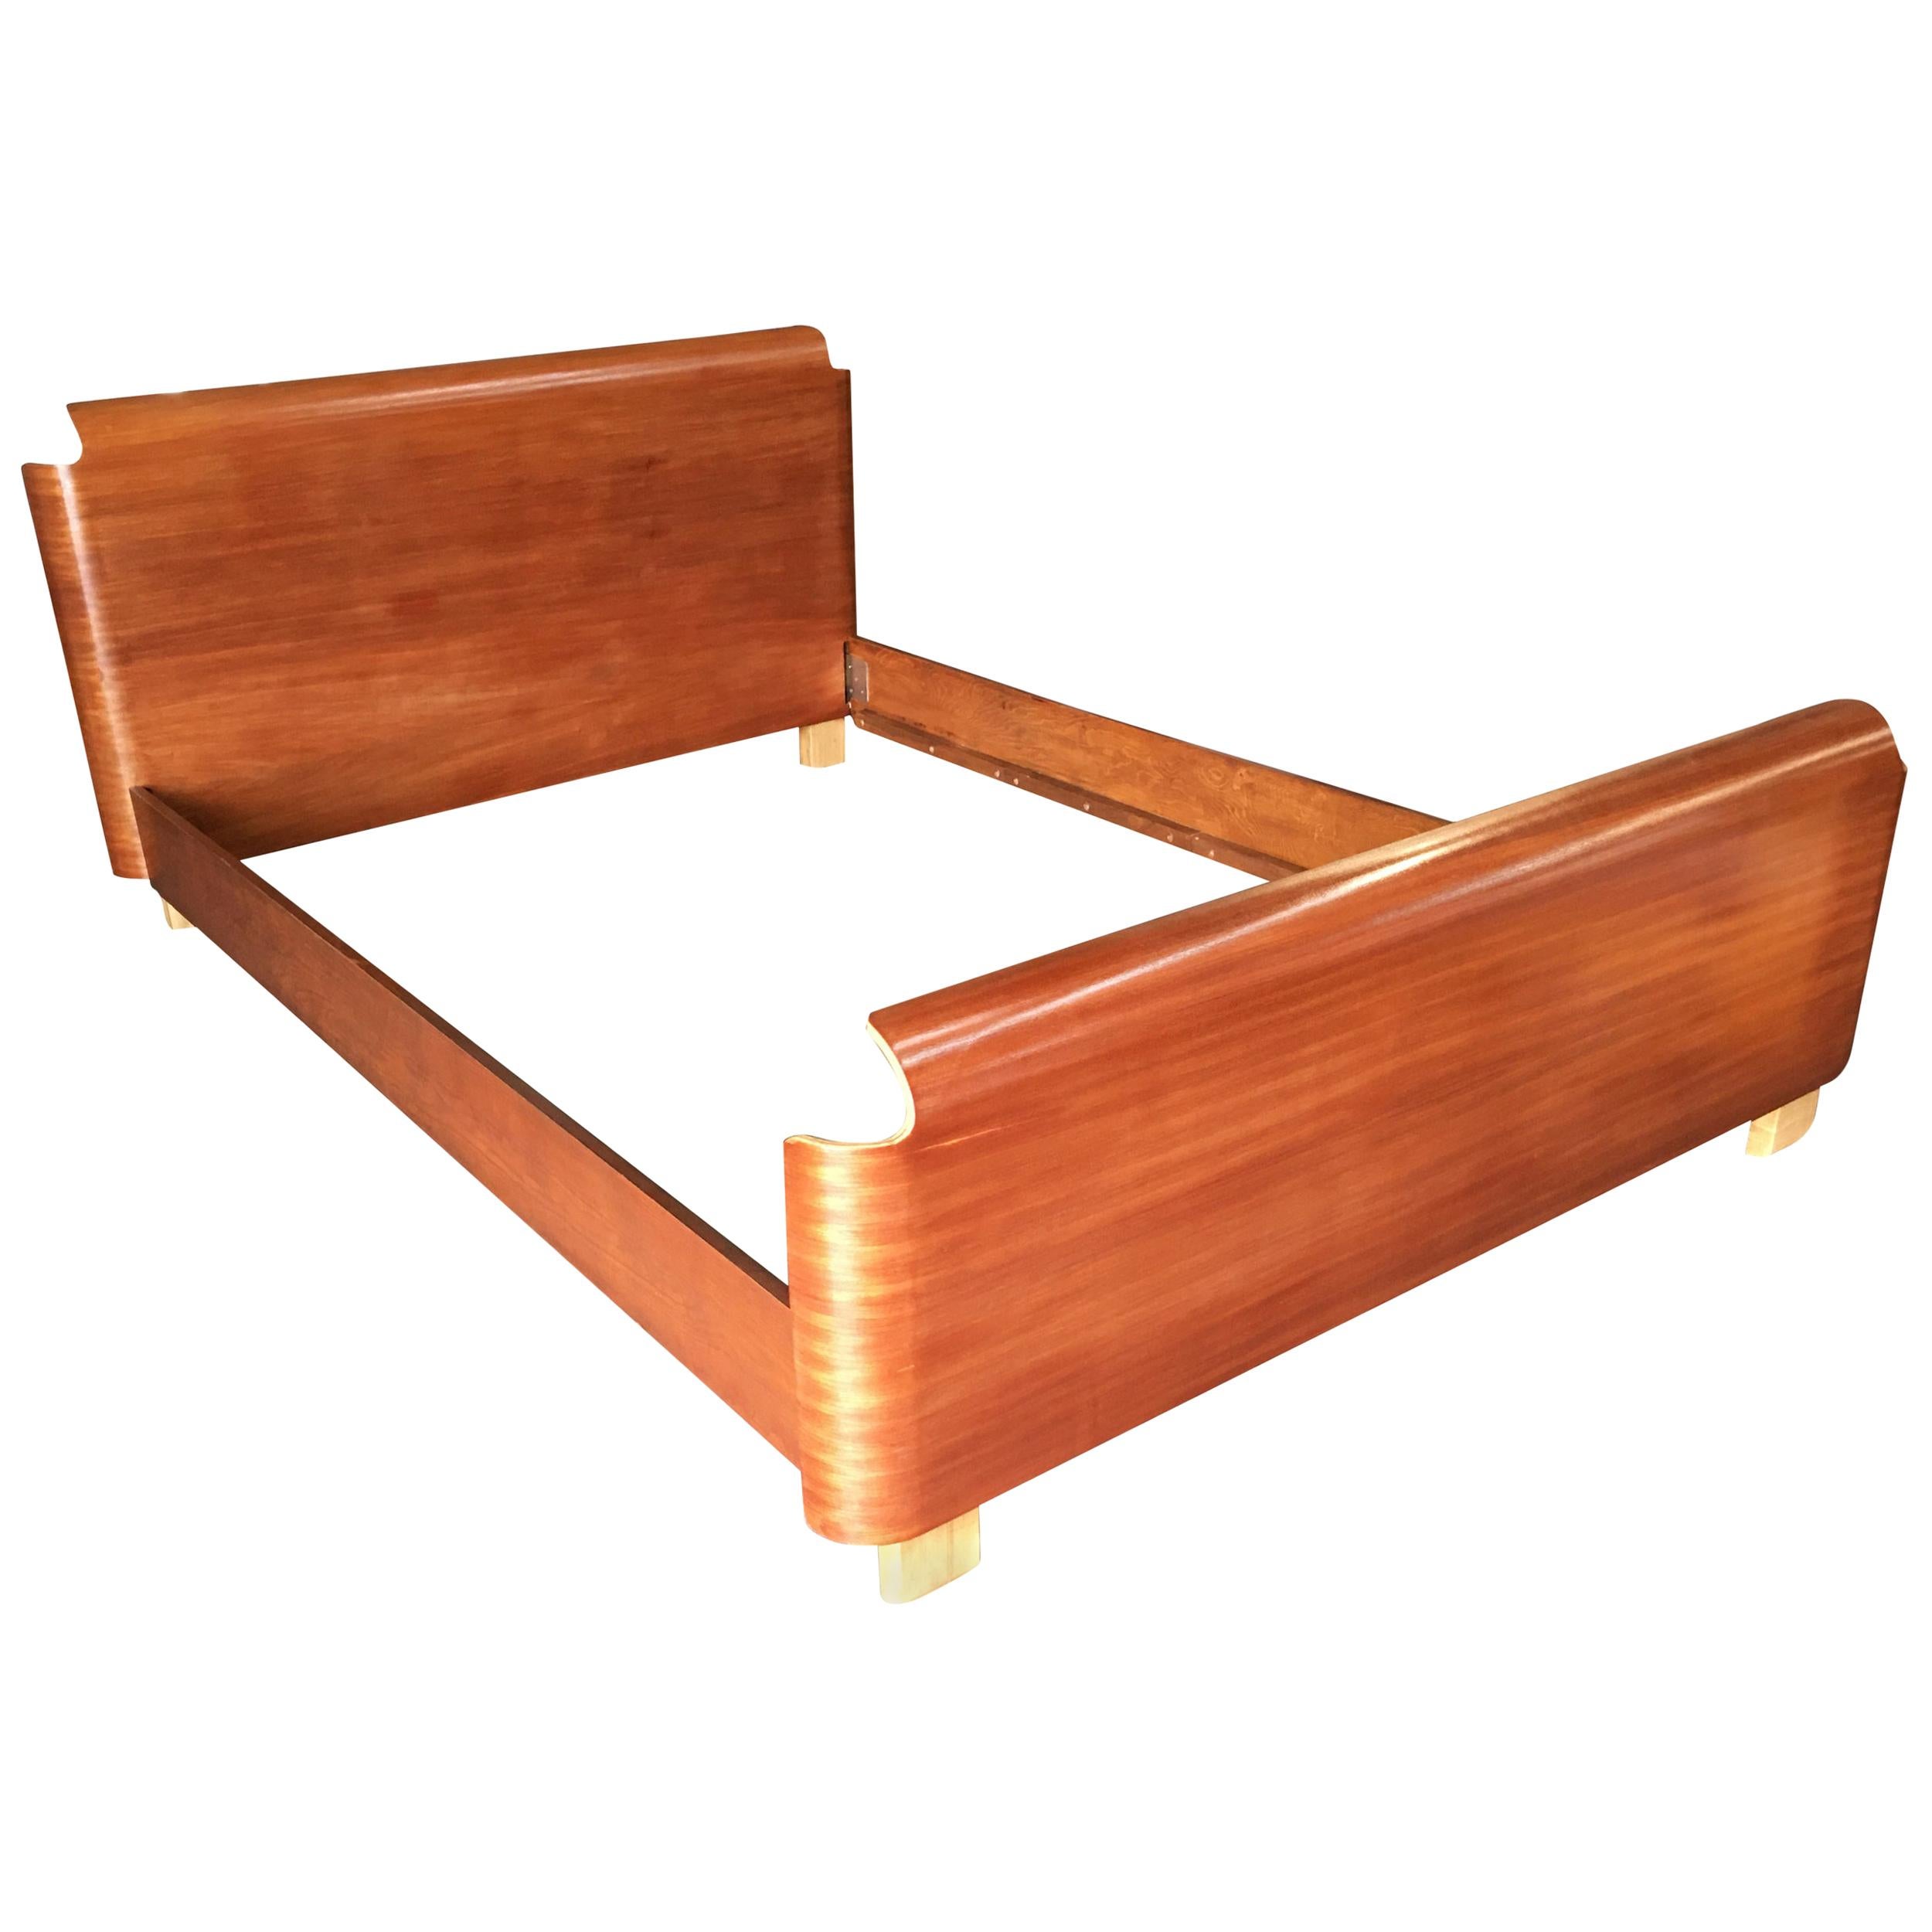 Midcentury Molded Plywood Bed Frame For, Plywood For King Bed